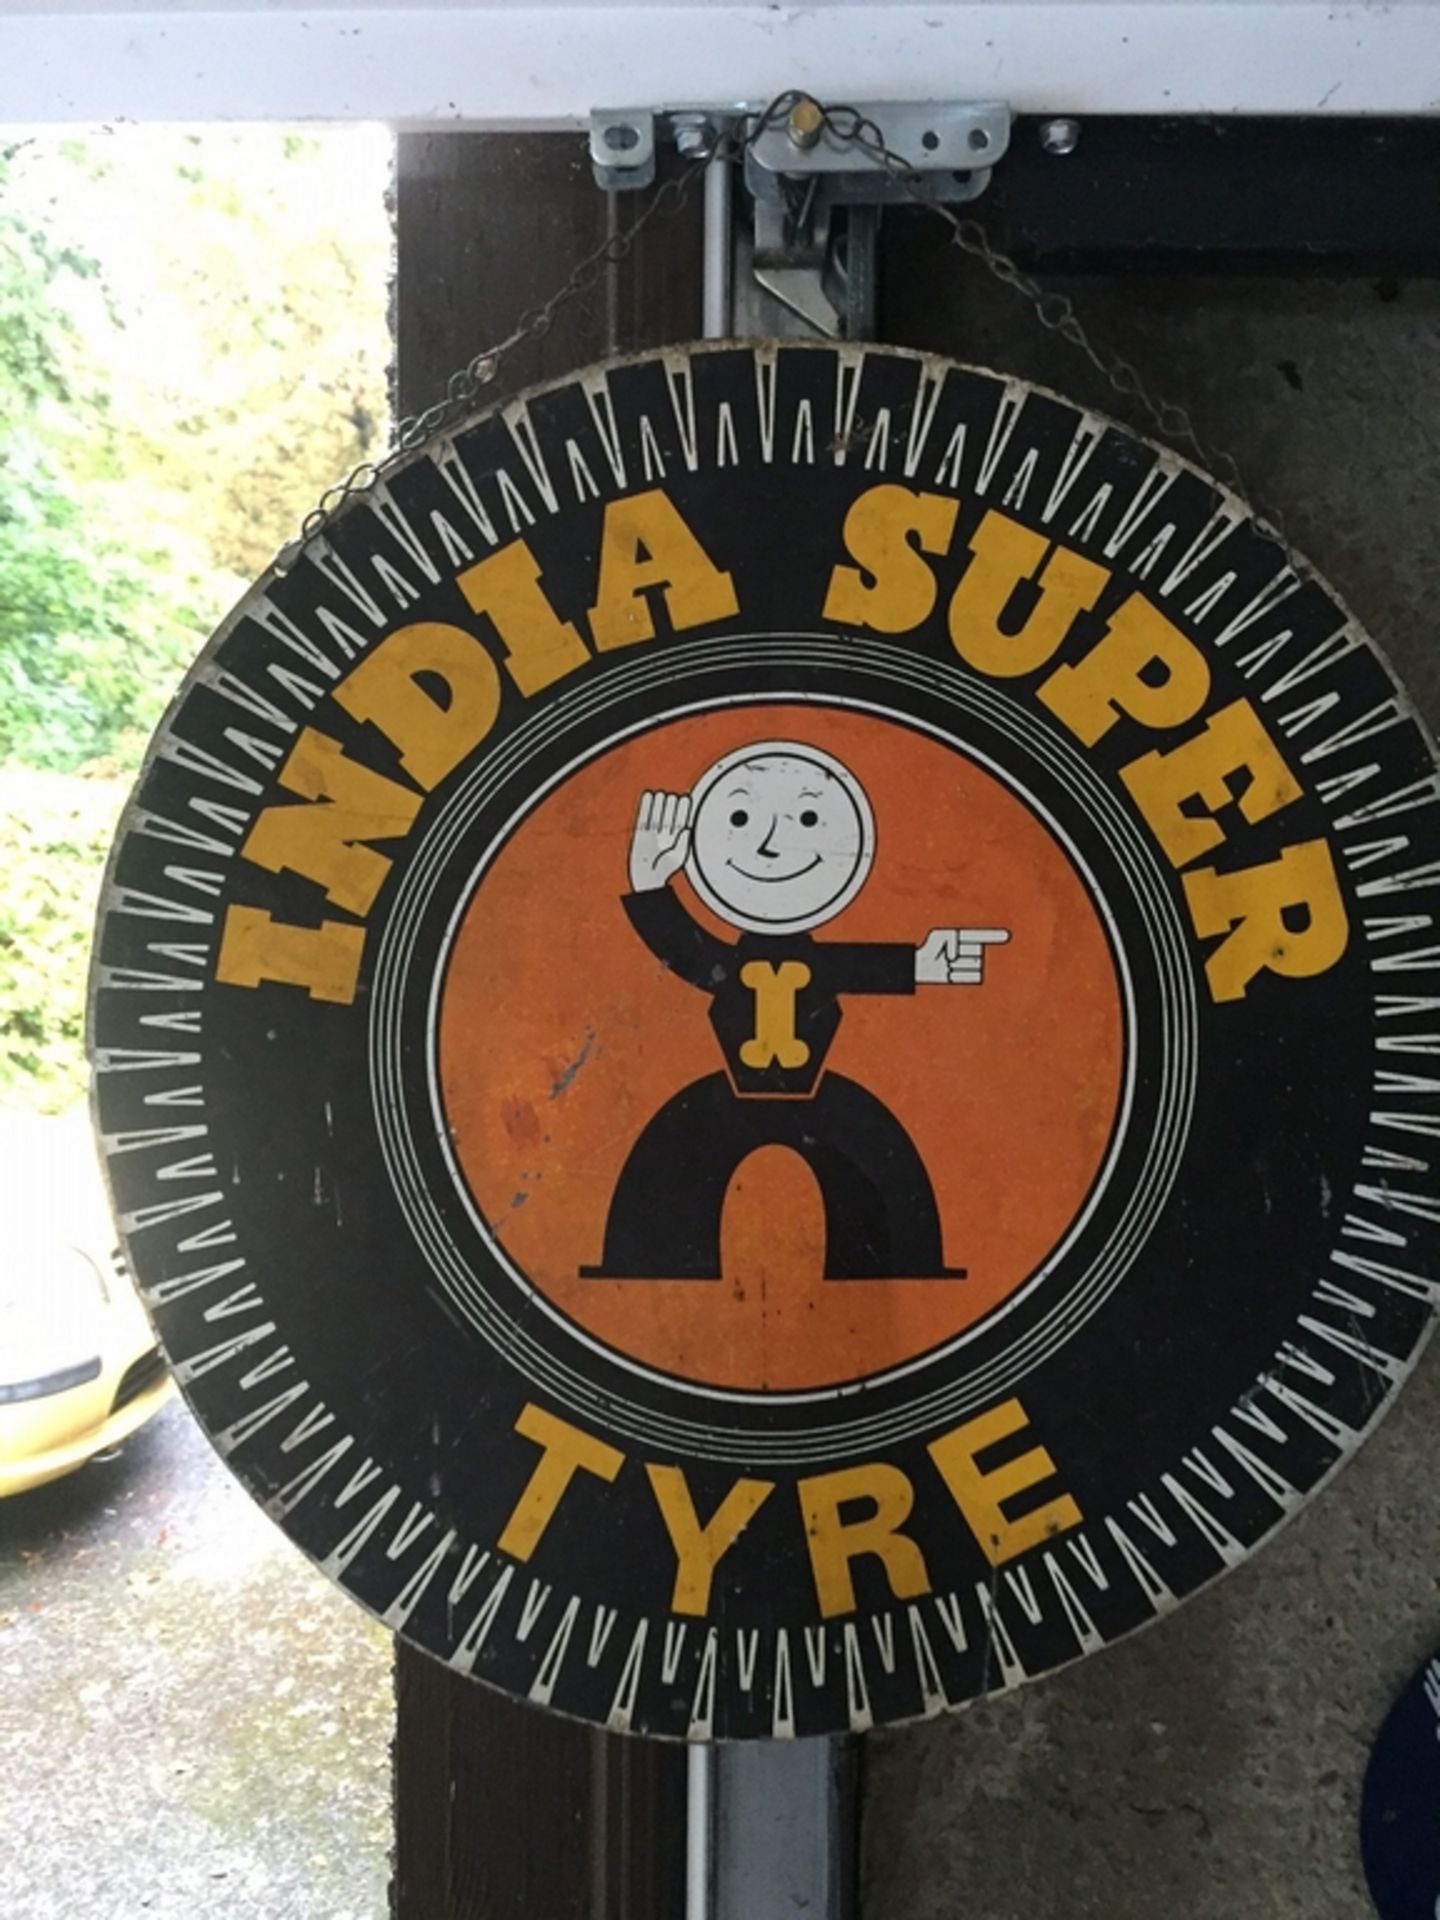 India Super Tyre advertising sign